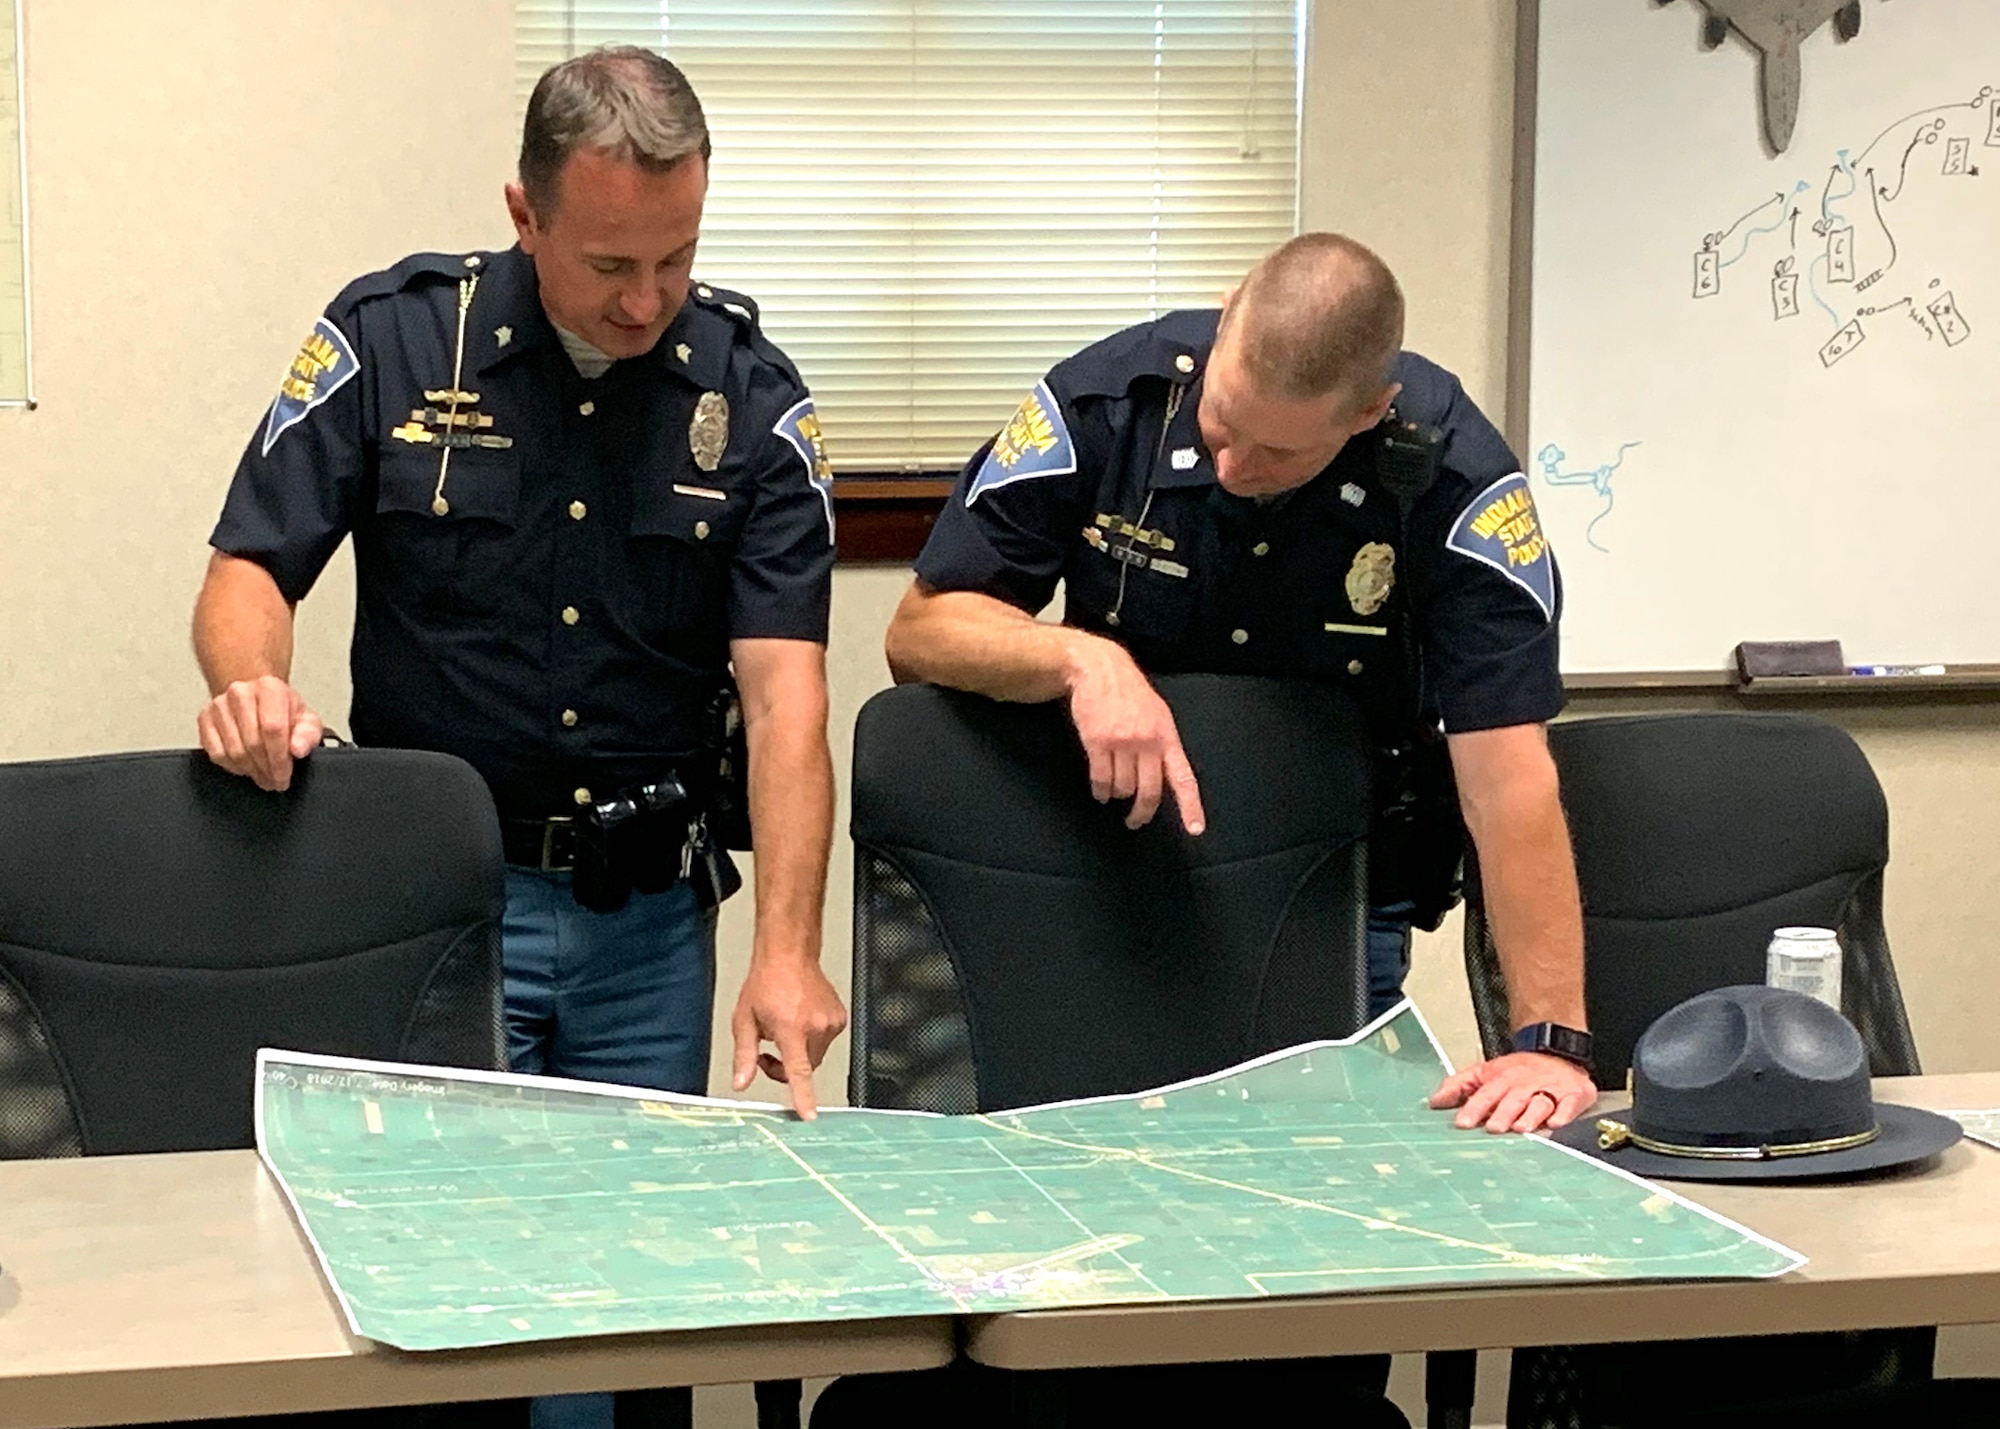 Troopers with the Indiana State Police review a parking map on June 9, 2019 at Grissom Air Reserve Base, Ind. The troopers have worked with base officials on parking plans for the Grissom Air and Space Expo scheduled for Sept. 7-8.